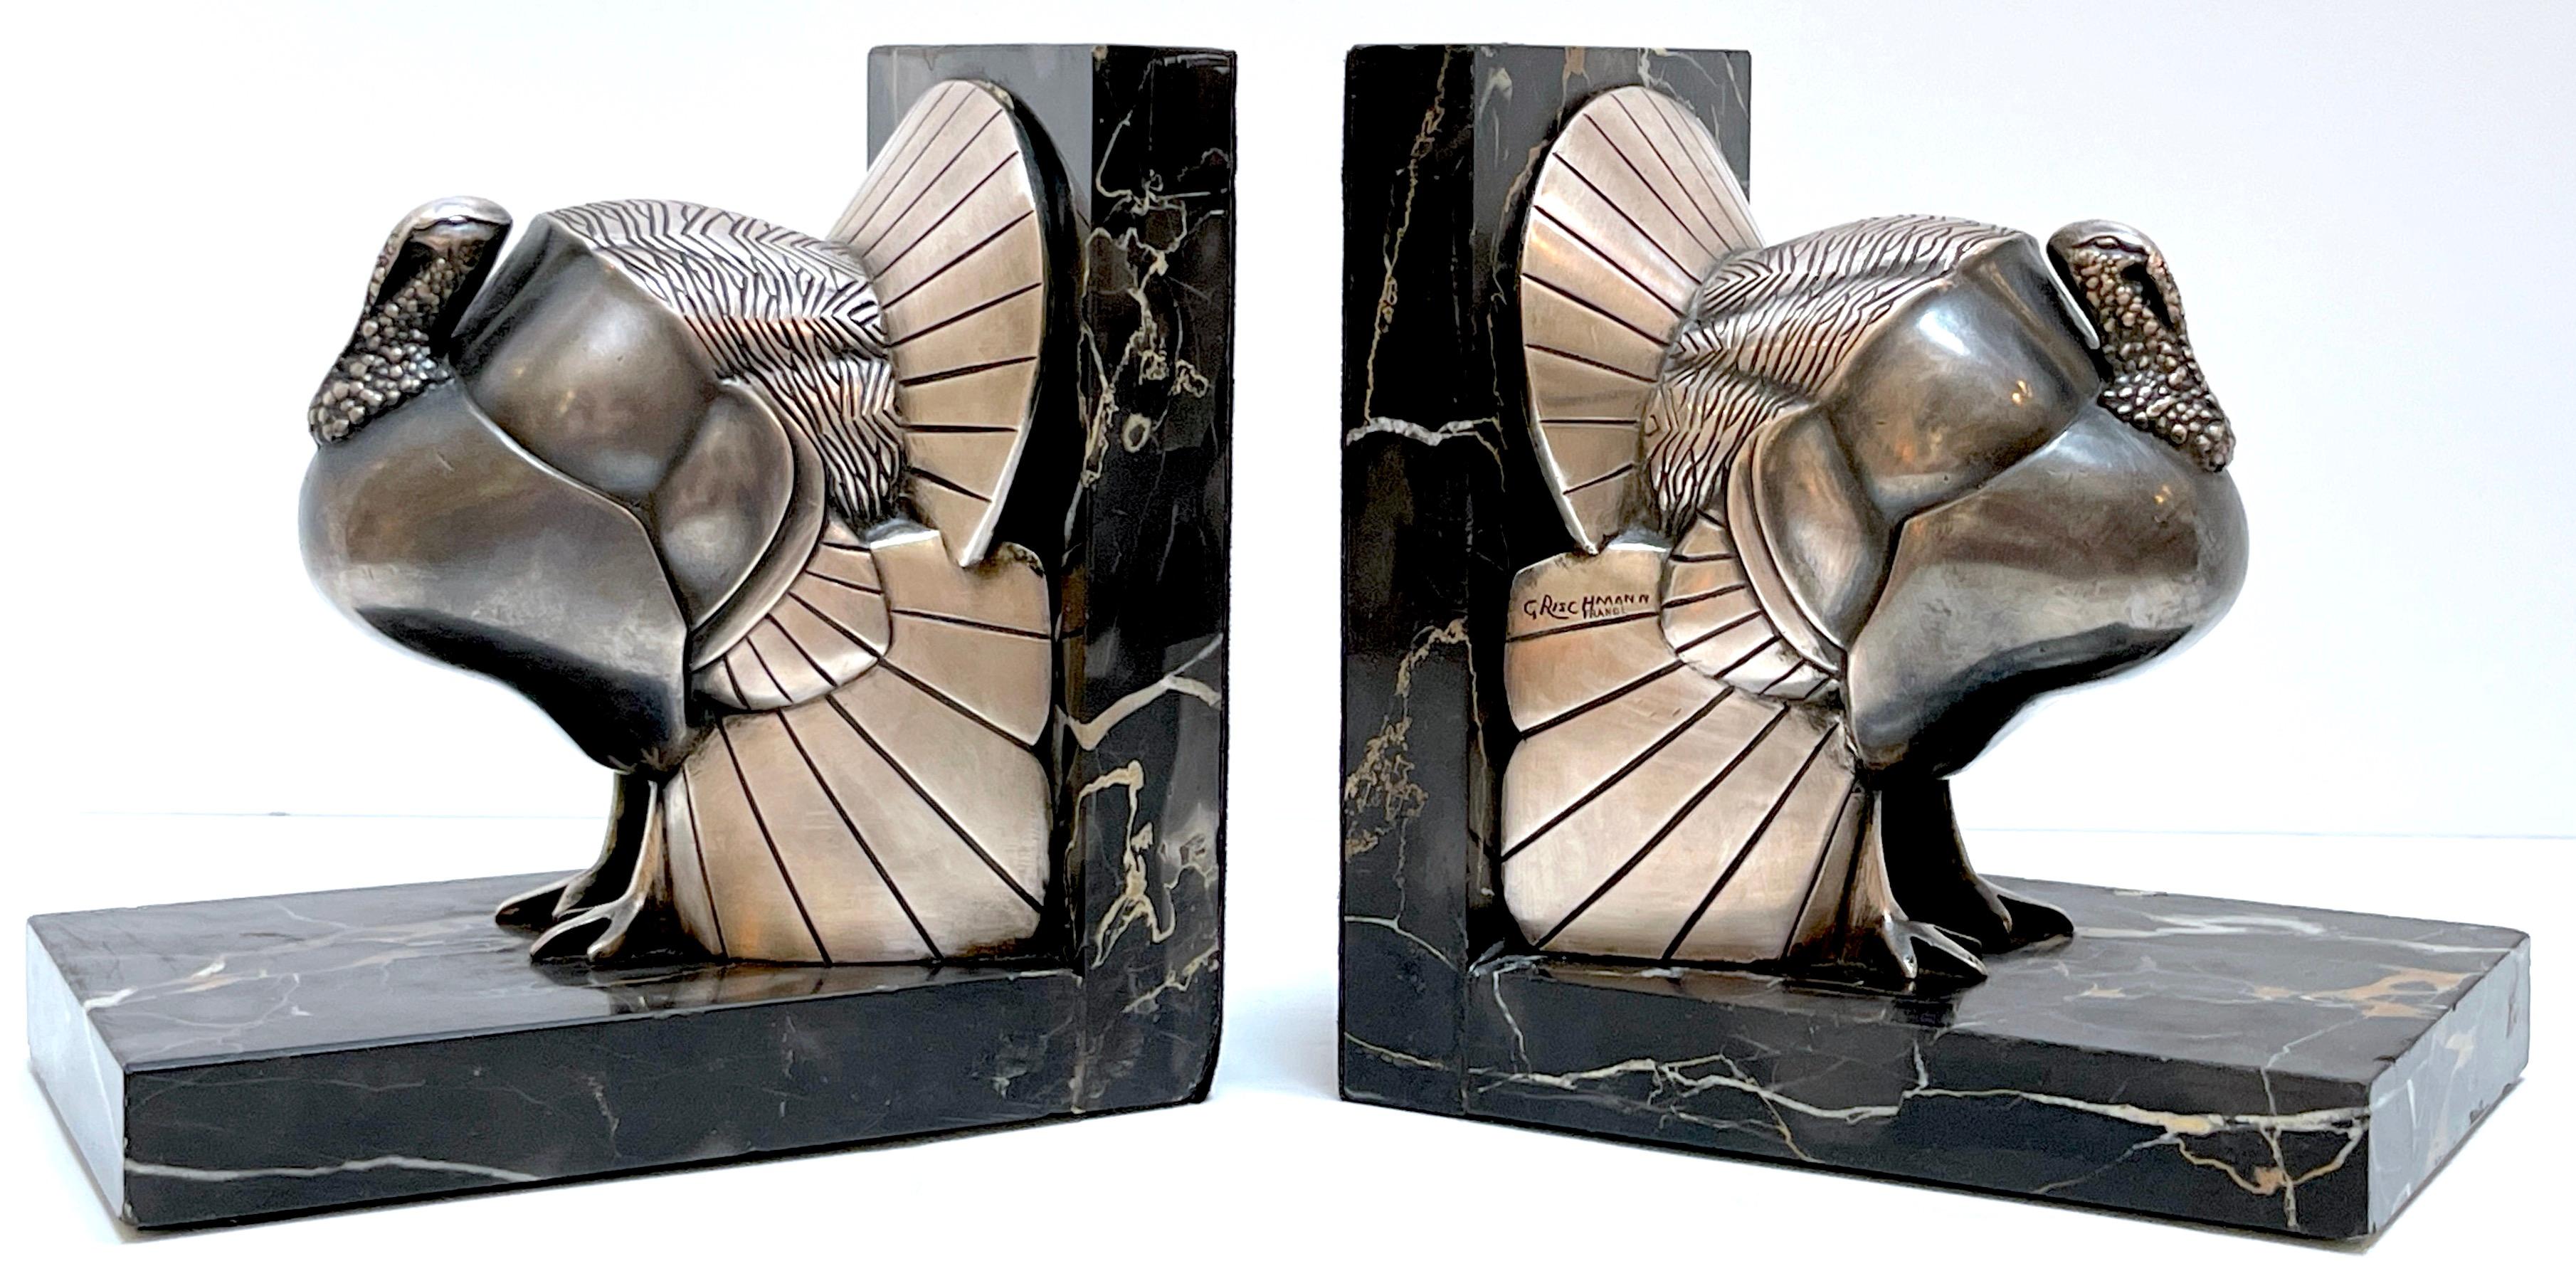 Pair Art Deco Silvered-Bronze 'Turkey' Bookends by G. Rischmann France, 1930s
Each one signed in script 'G. Rischmann France'
By Gaston Rischmann (1907-1979)

A unique pair of Art Deco silvered-bronze 'Turkey' bookends crafted by G. Rischmann in